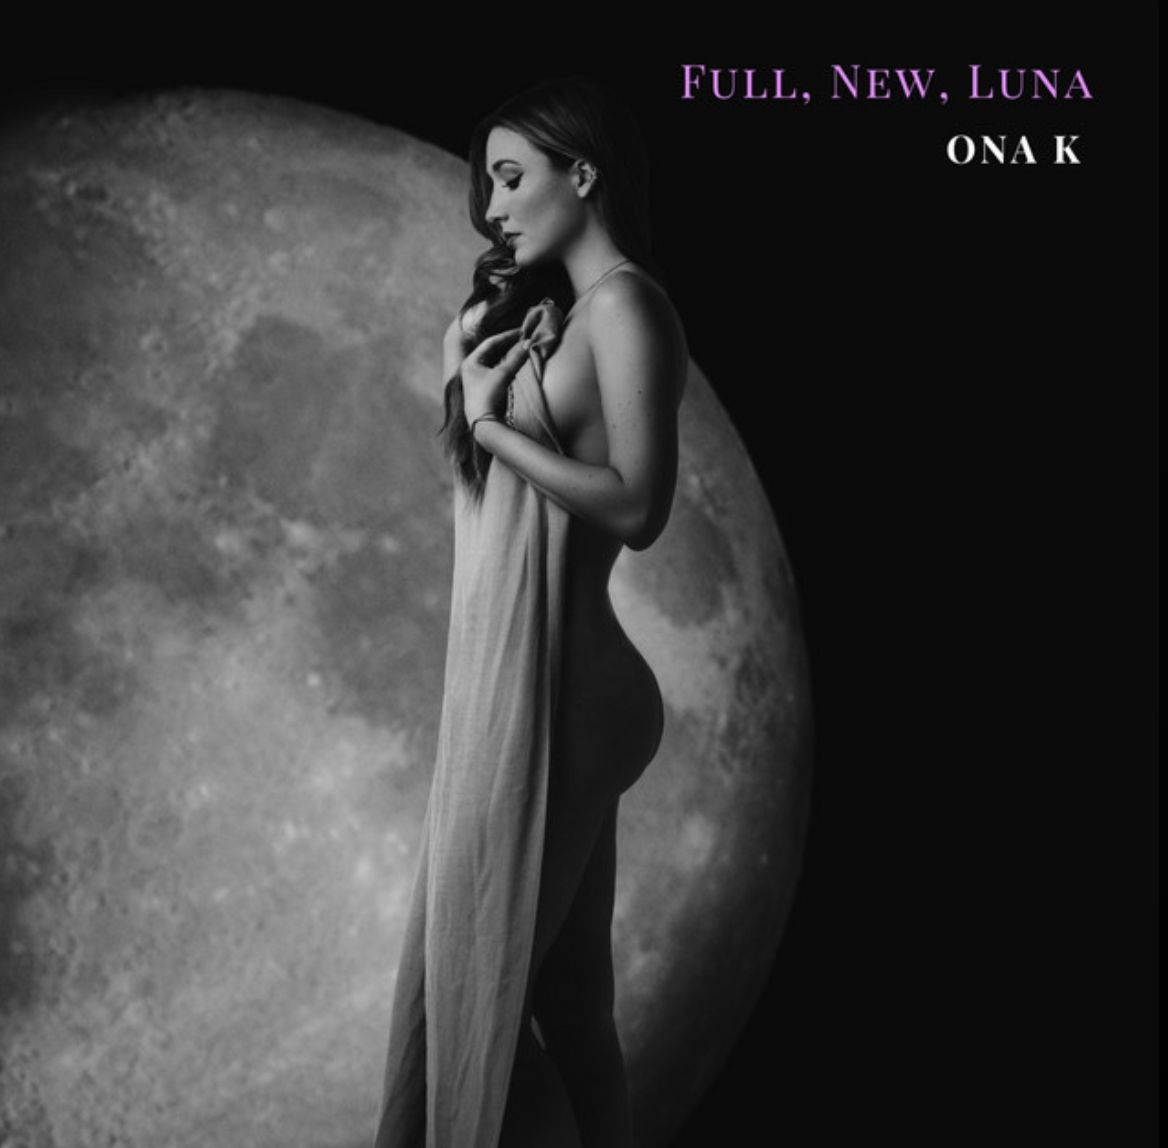 Ona K album cover. A black and white image of woman in a ballgown dress standing in front of the moon.